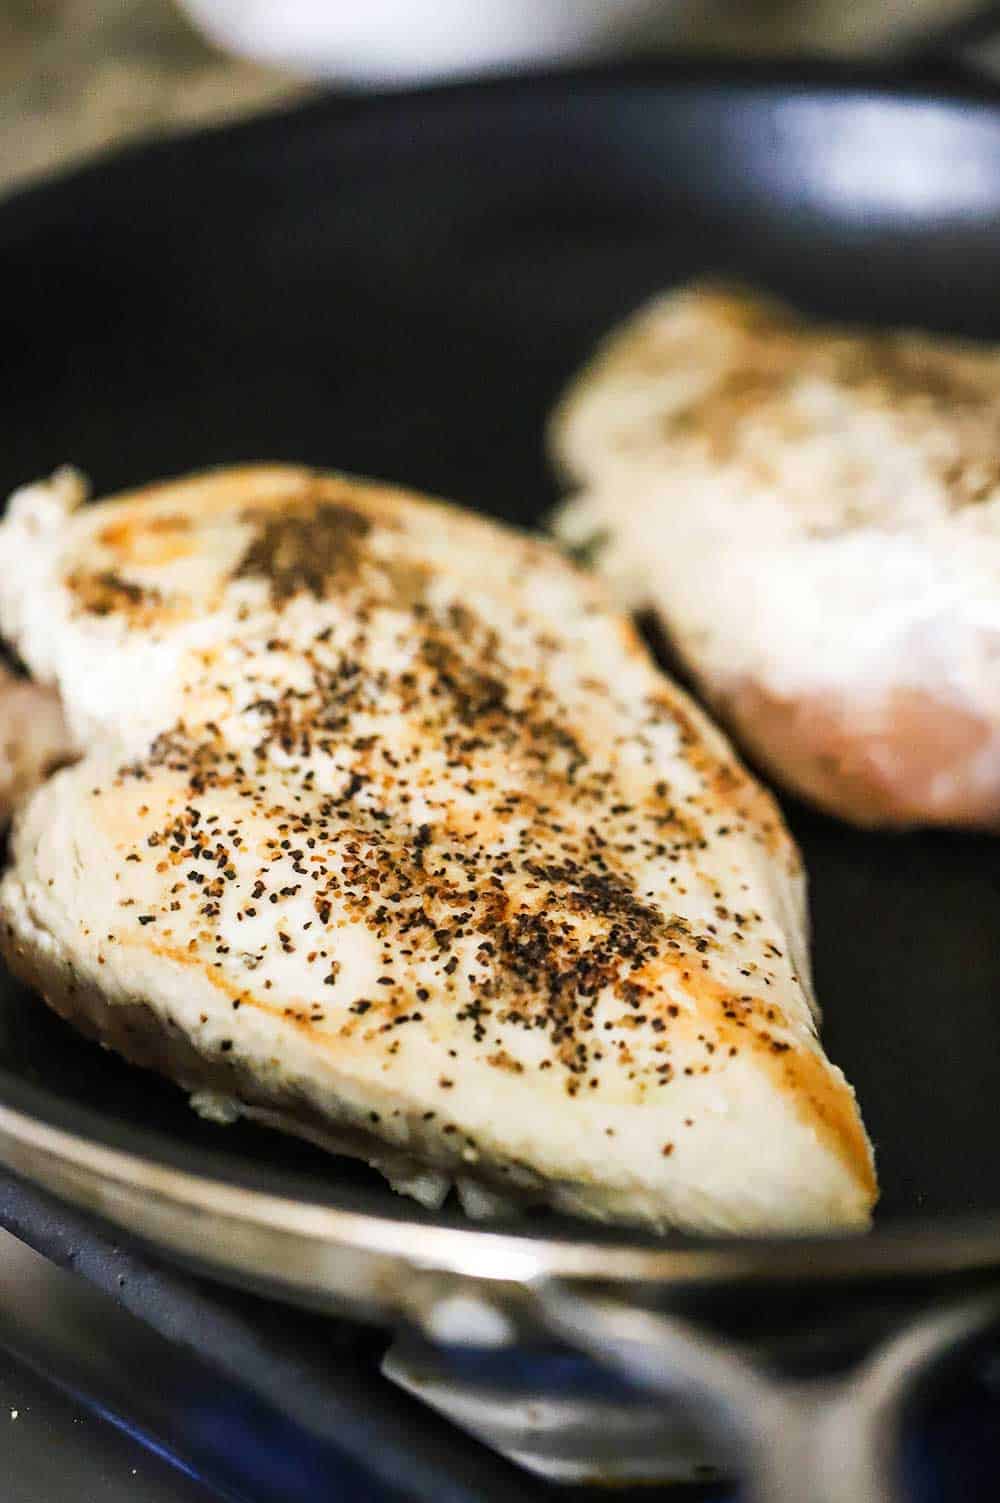 Two large chicken breasts that are being seared in a black non-stick skillet over a gas stove.